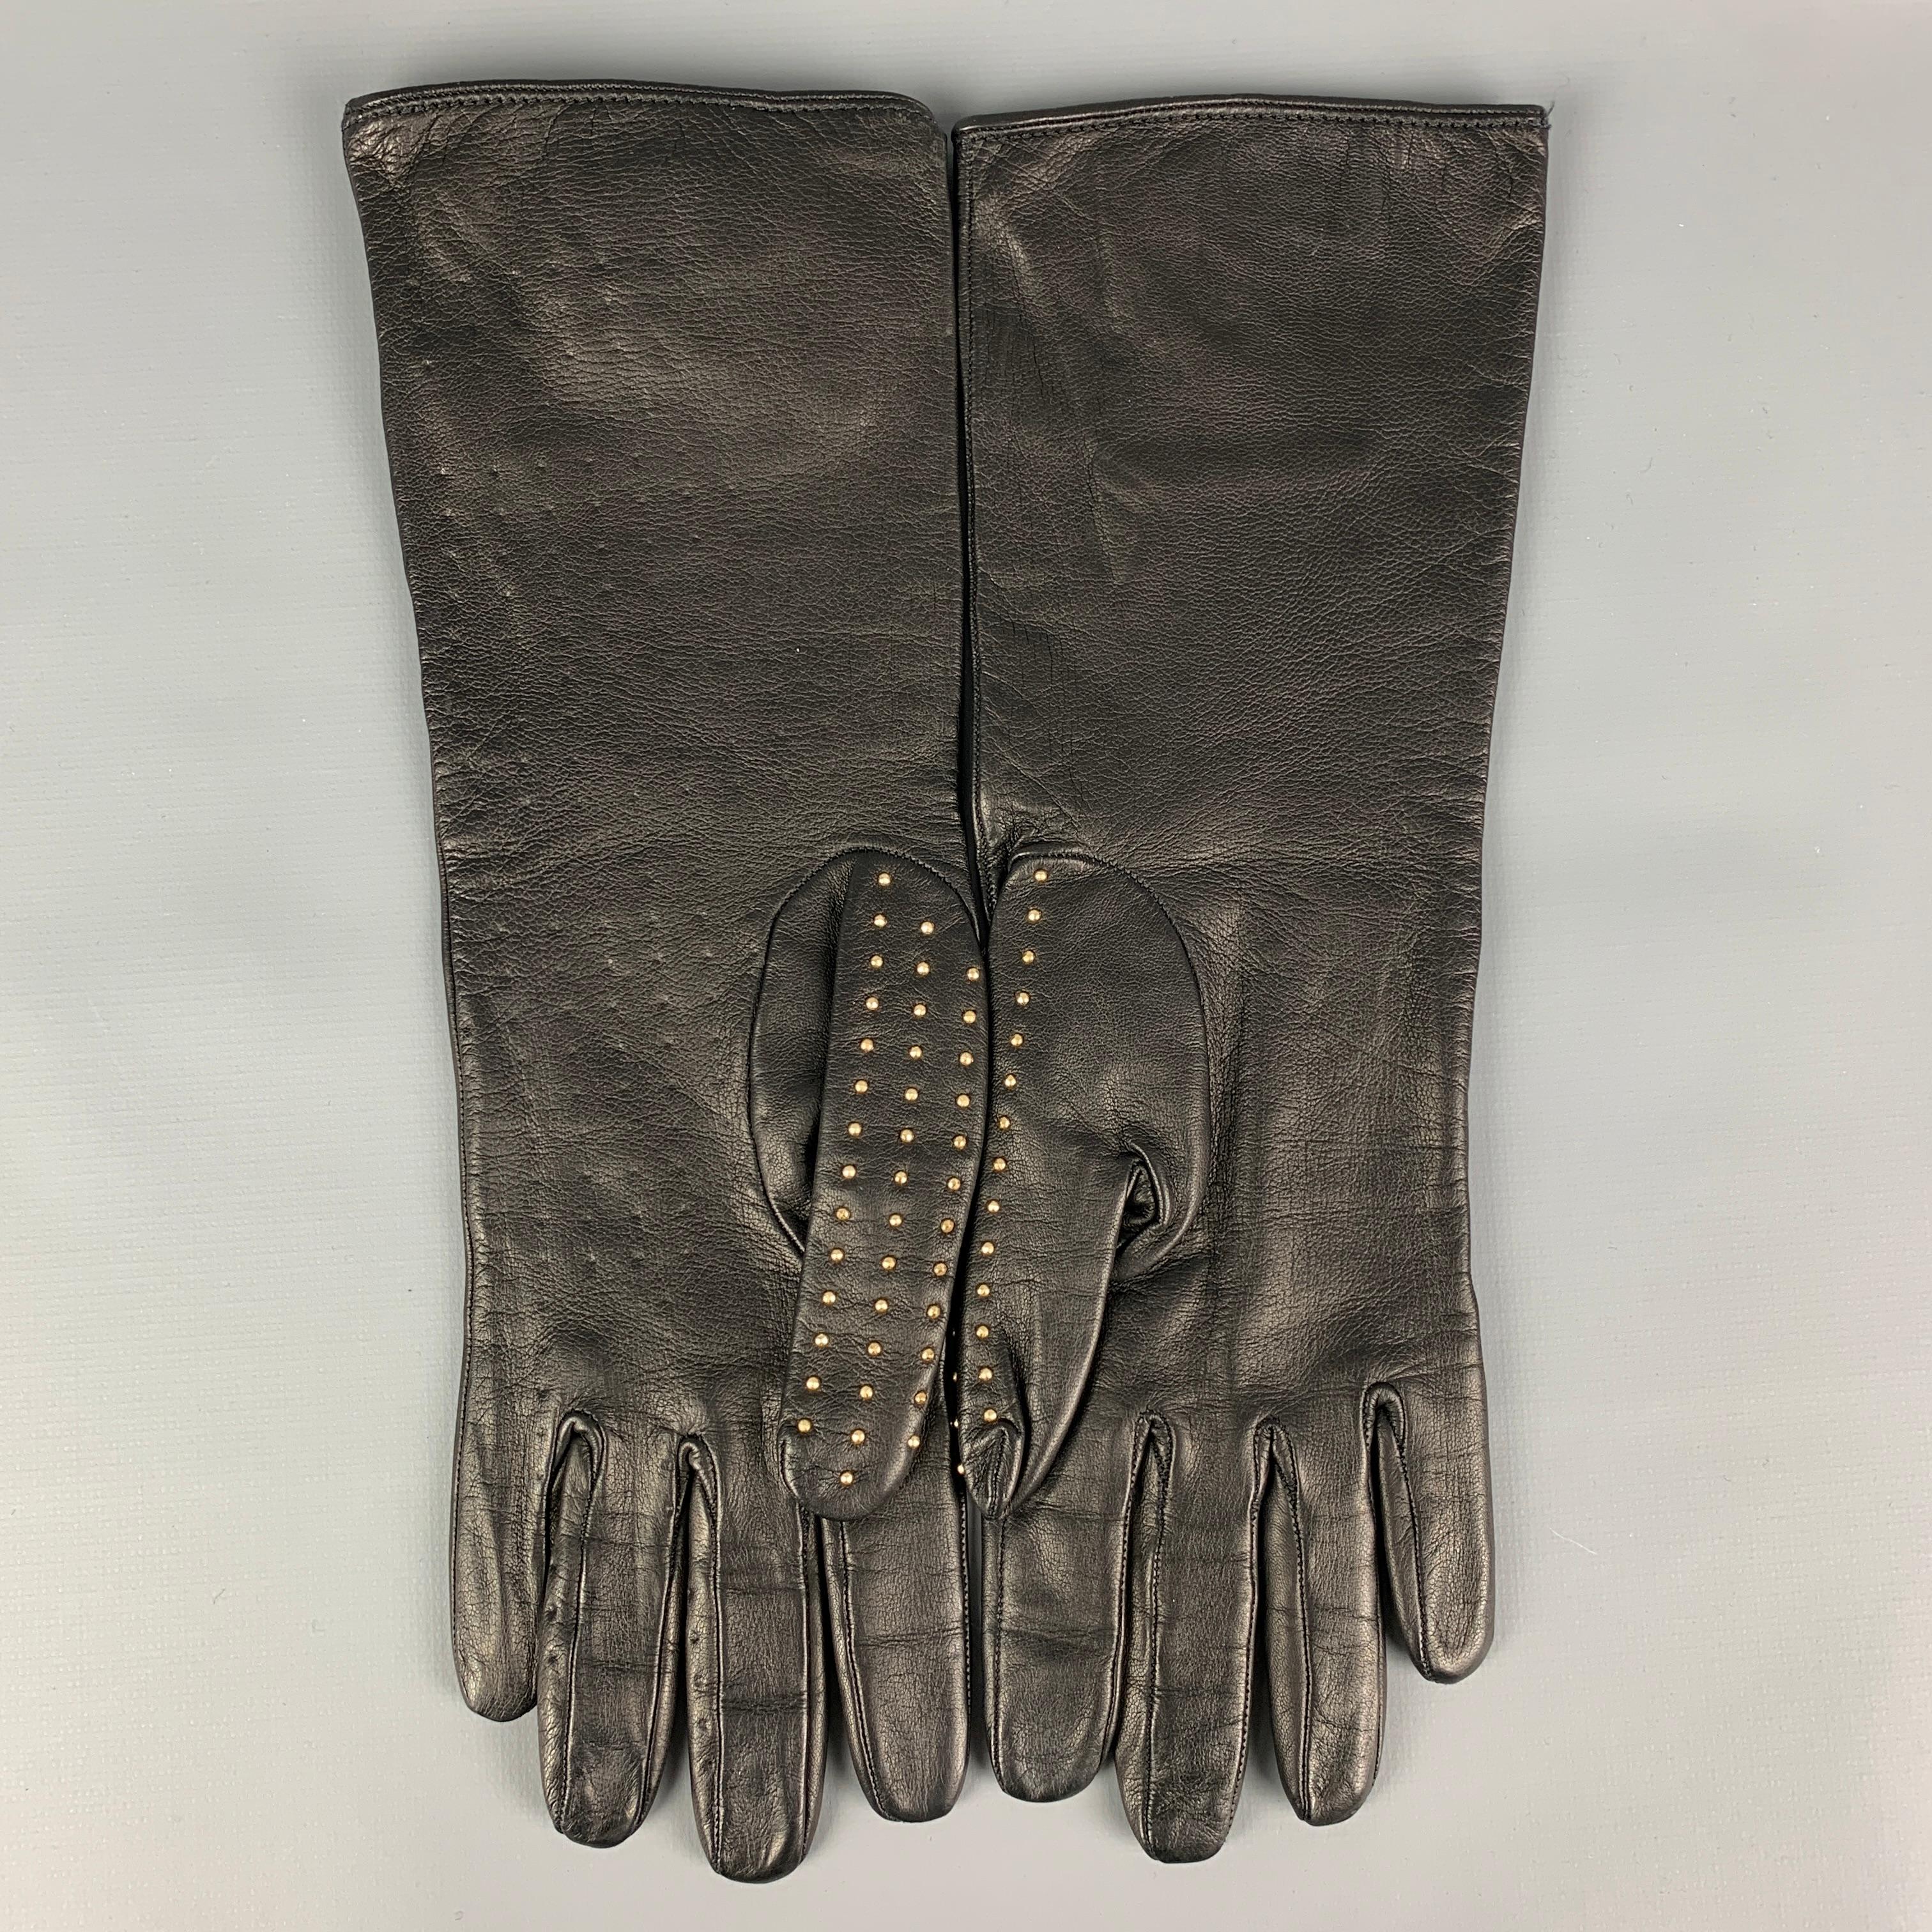 BURBERRY PRORSUM gloves comes in a black kidskin leather with a silk lining featuring gold tone studded details. Made in Italy. 

New With Tags. 
Marked: 7

Measurements:

Width: 4 in.
Length: 12 in.
 